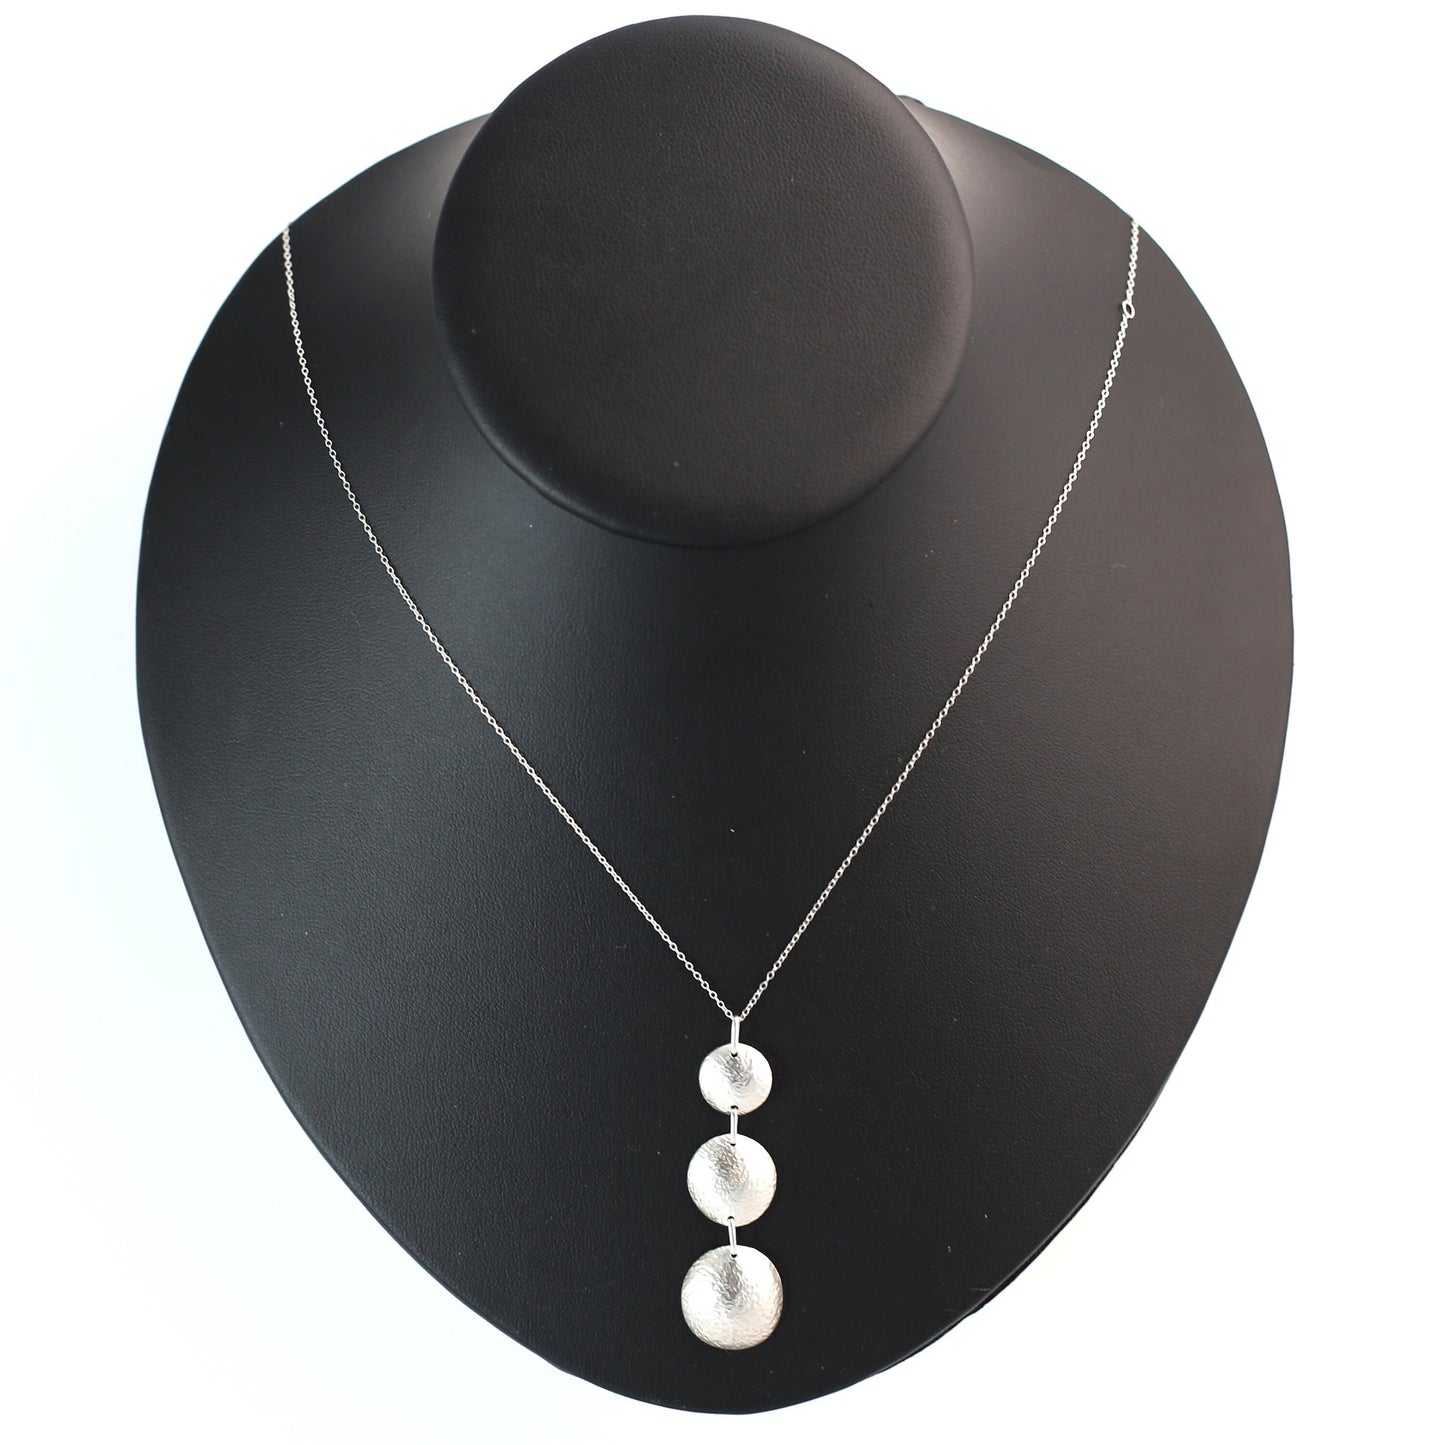 Luna Hammered Circles Sterling Silver Everyday Pendant Necklace. Handmade by Cara Carter Jewelry